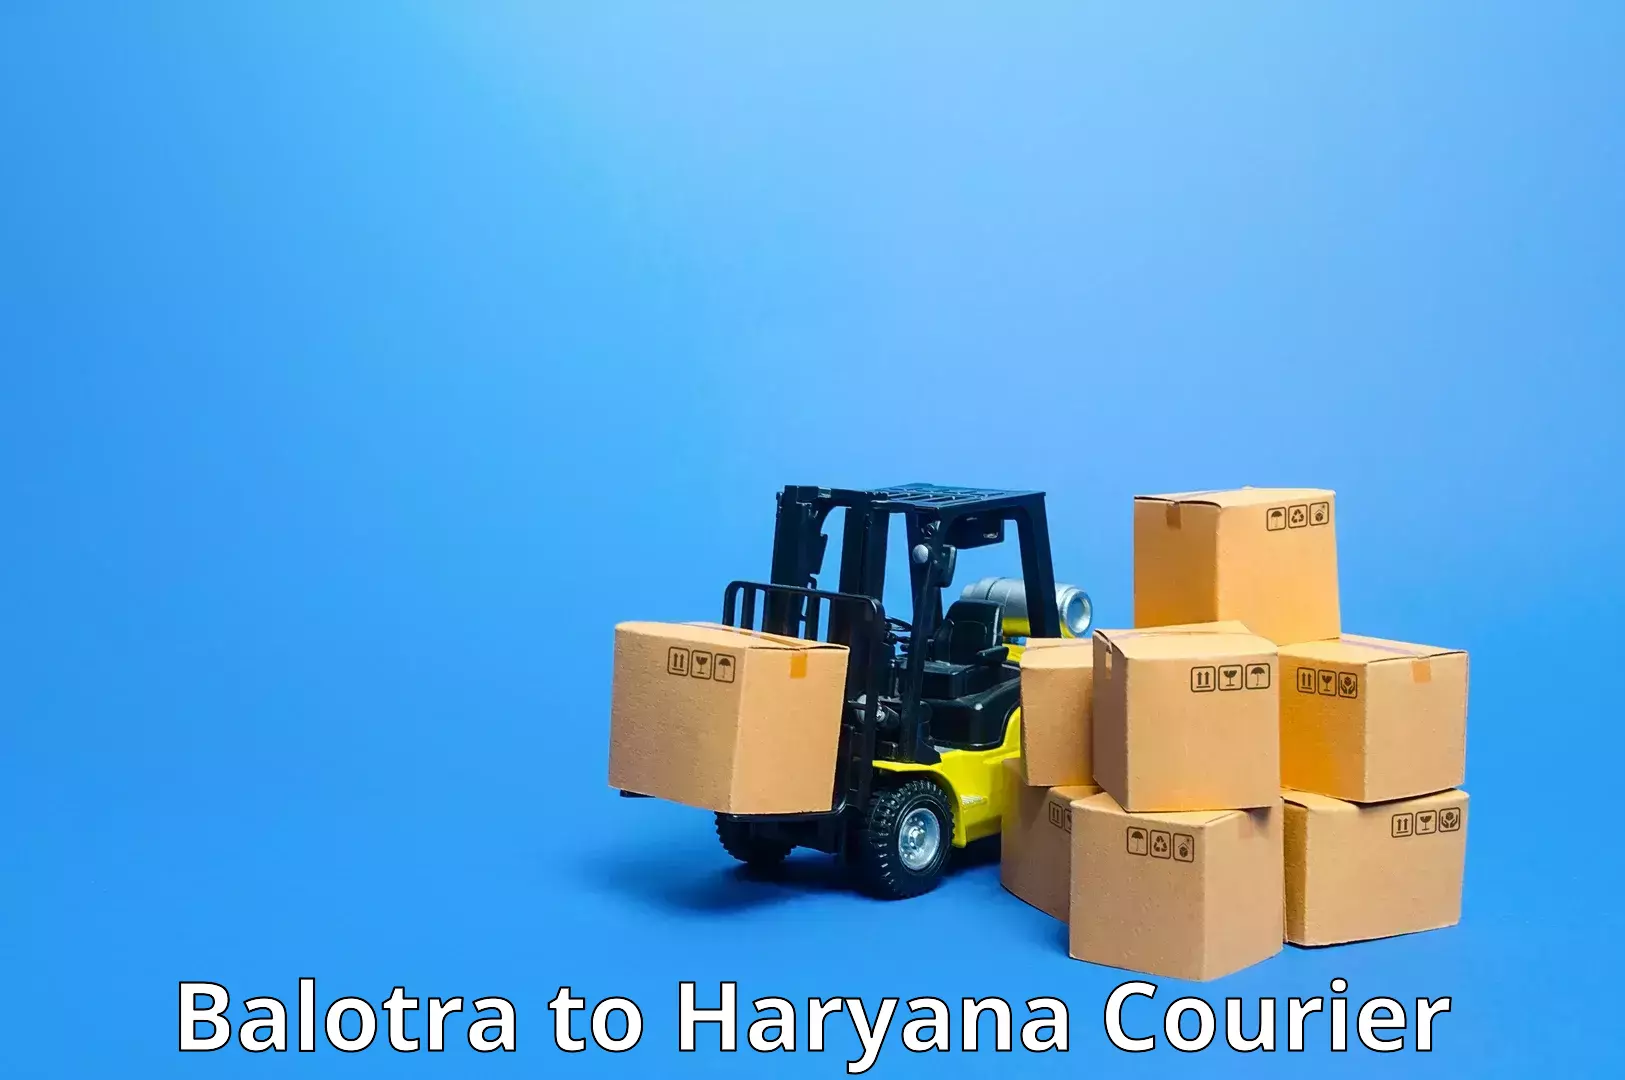 Courier service comparison Balotra to Palwal